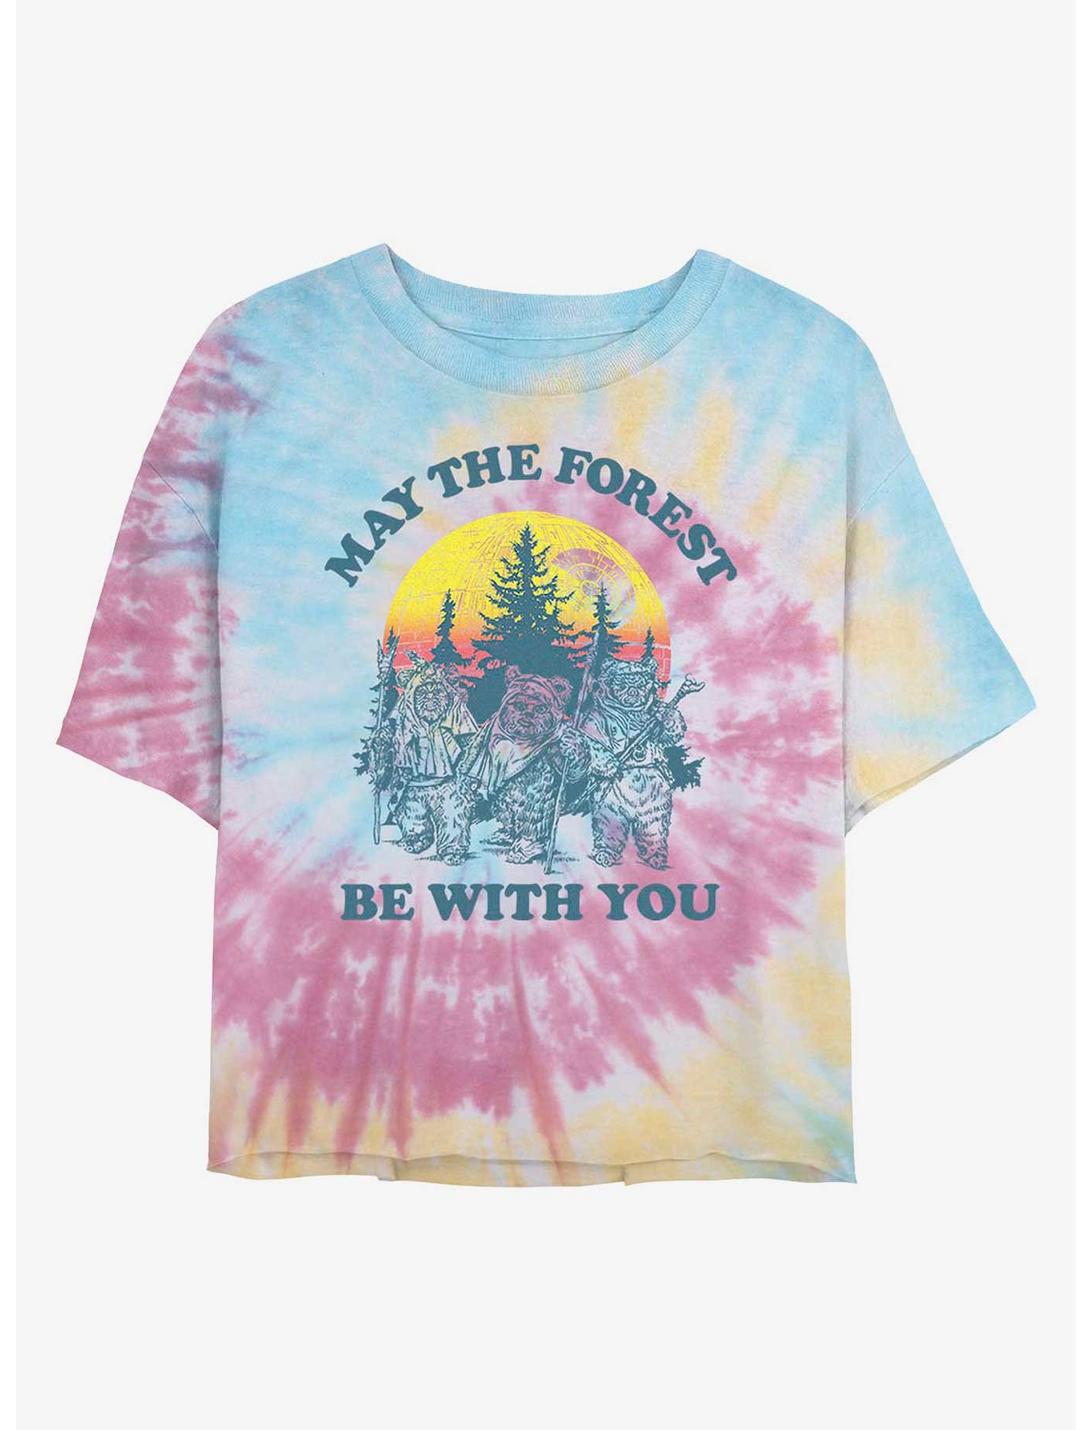 Star Wars Ewok Forest Be With You Tie Dye Crop Girls T-Shirt, BLUPNKLY, hi-res